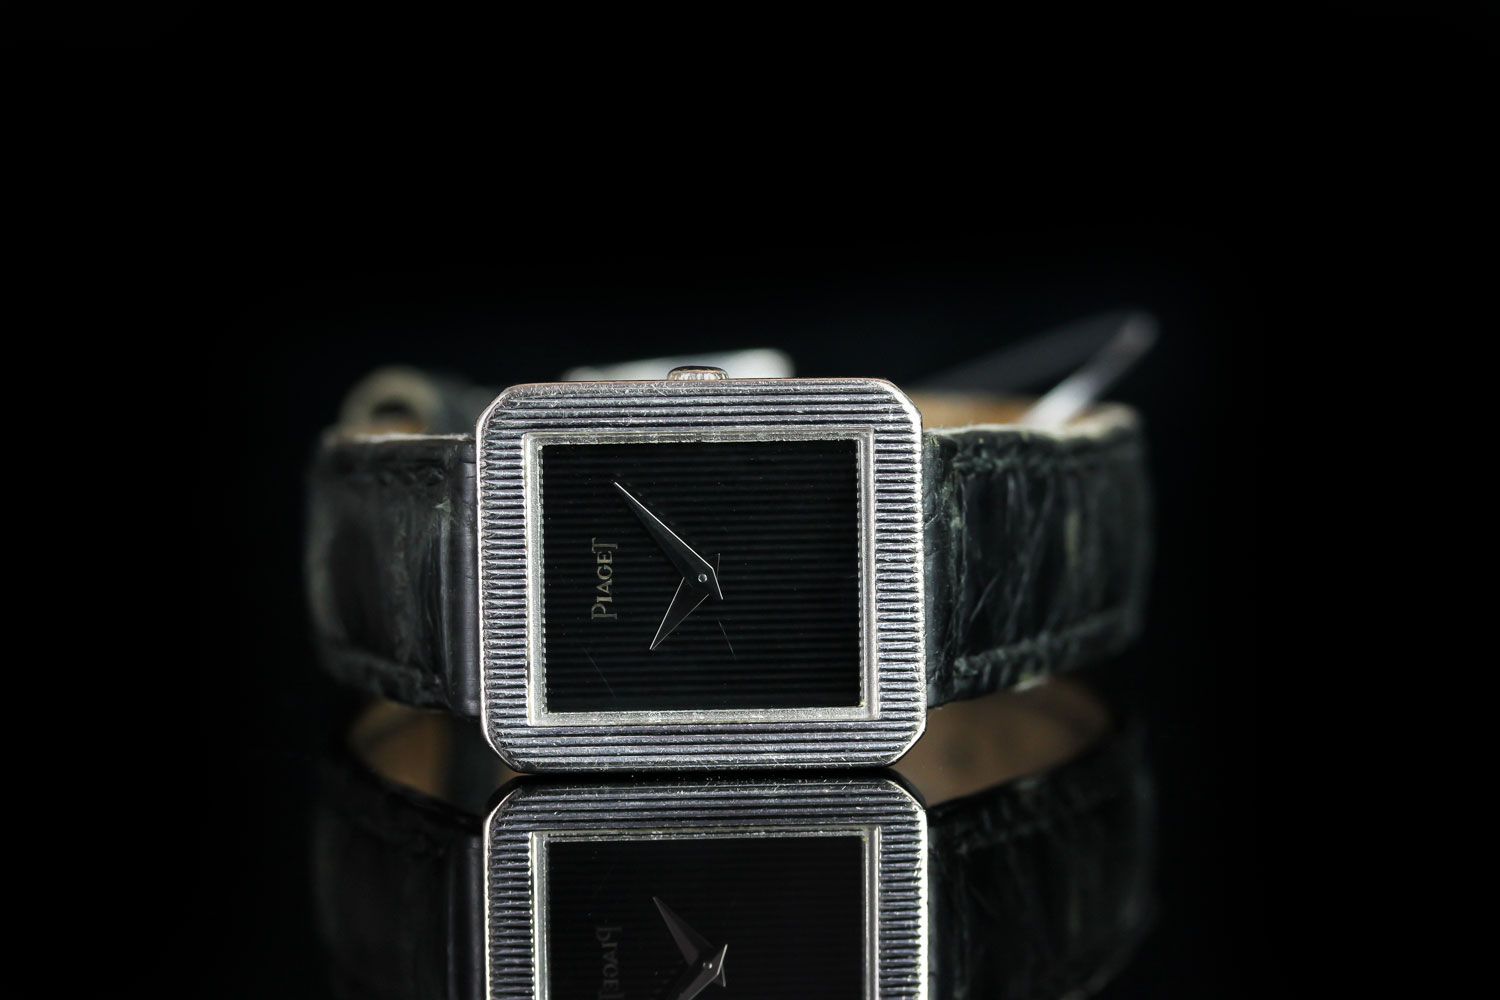 LADIES 18K WHITE GOLD VINTAGE PIAGET 8354 CIRCA 1999, oblong, black dial with silver sword hands,